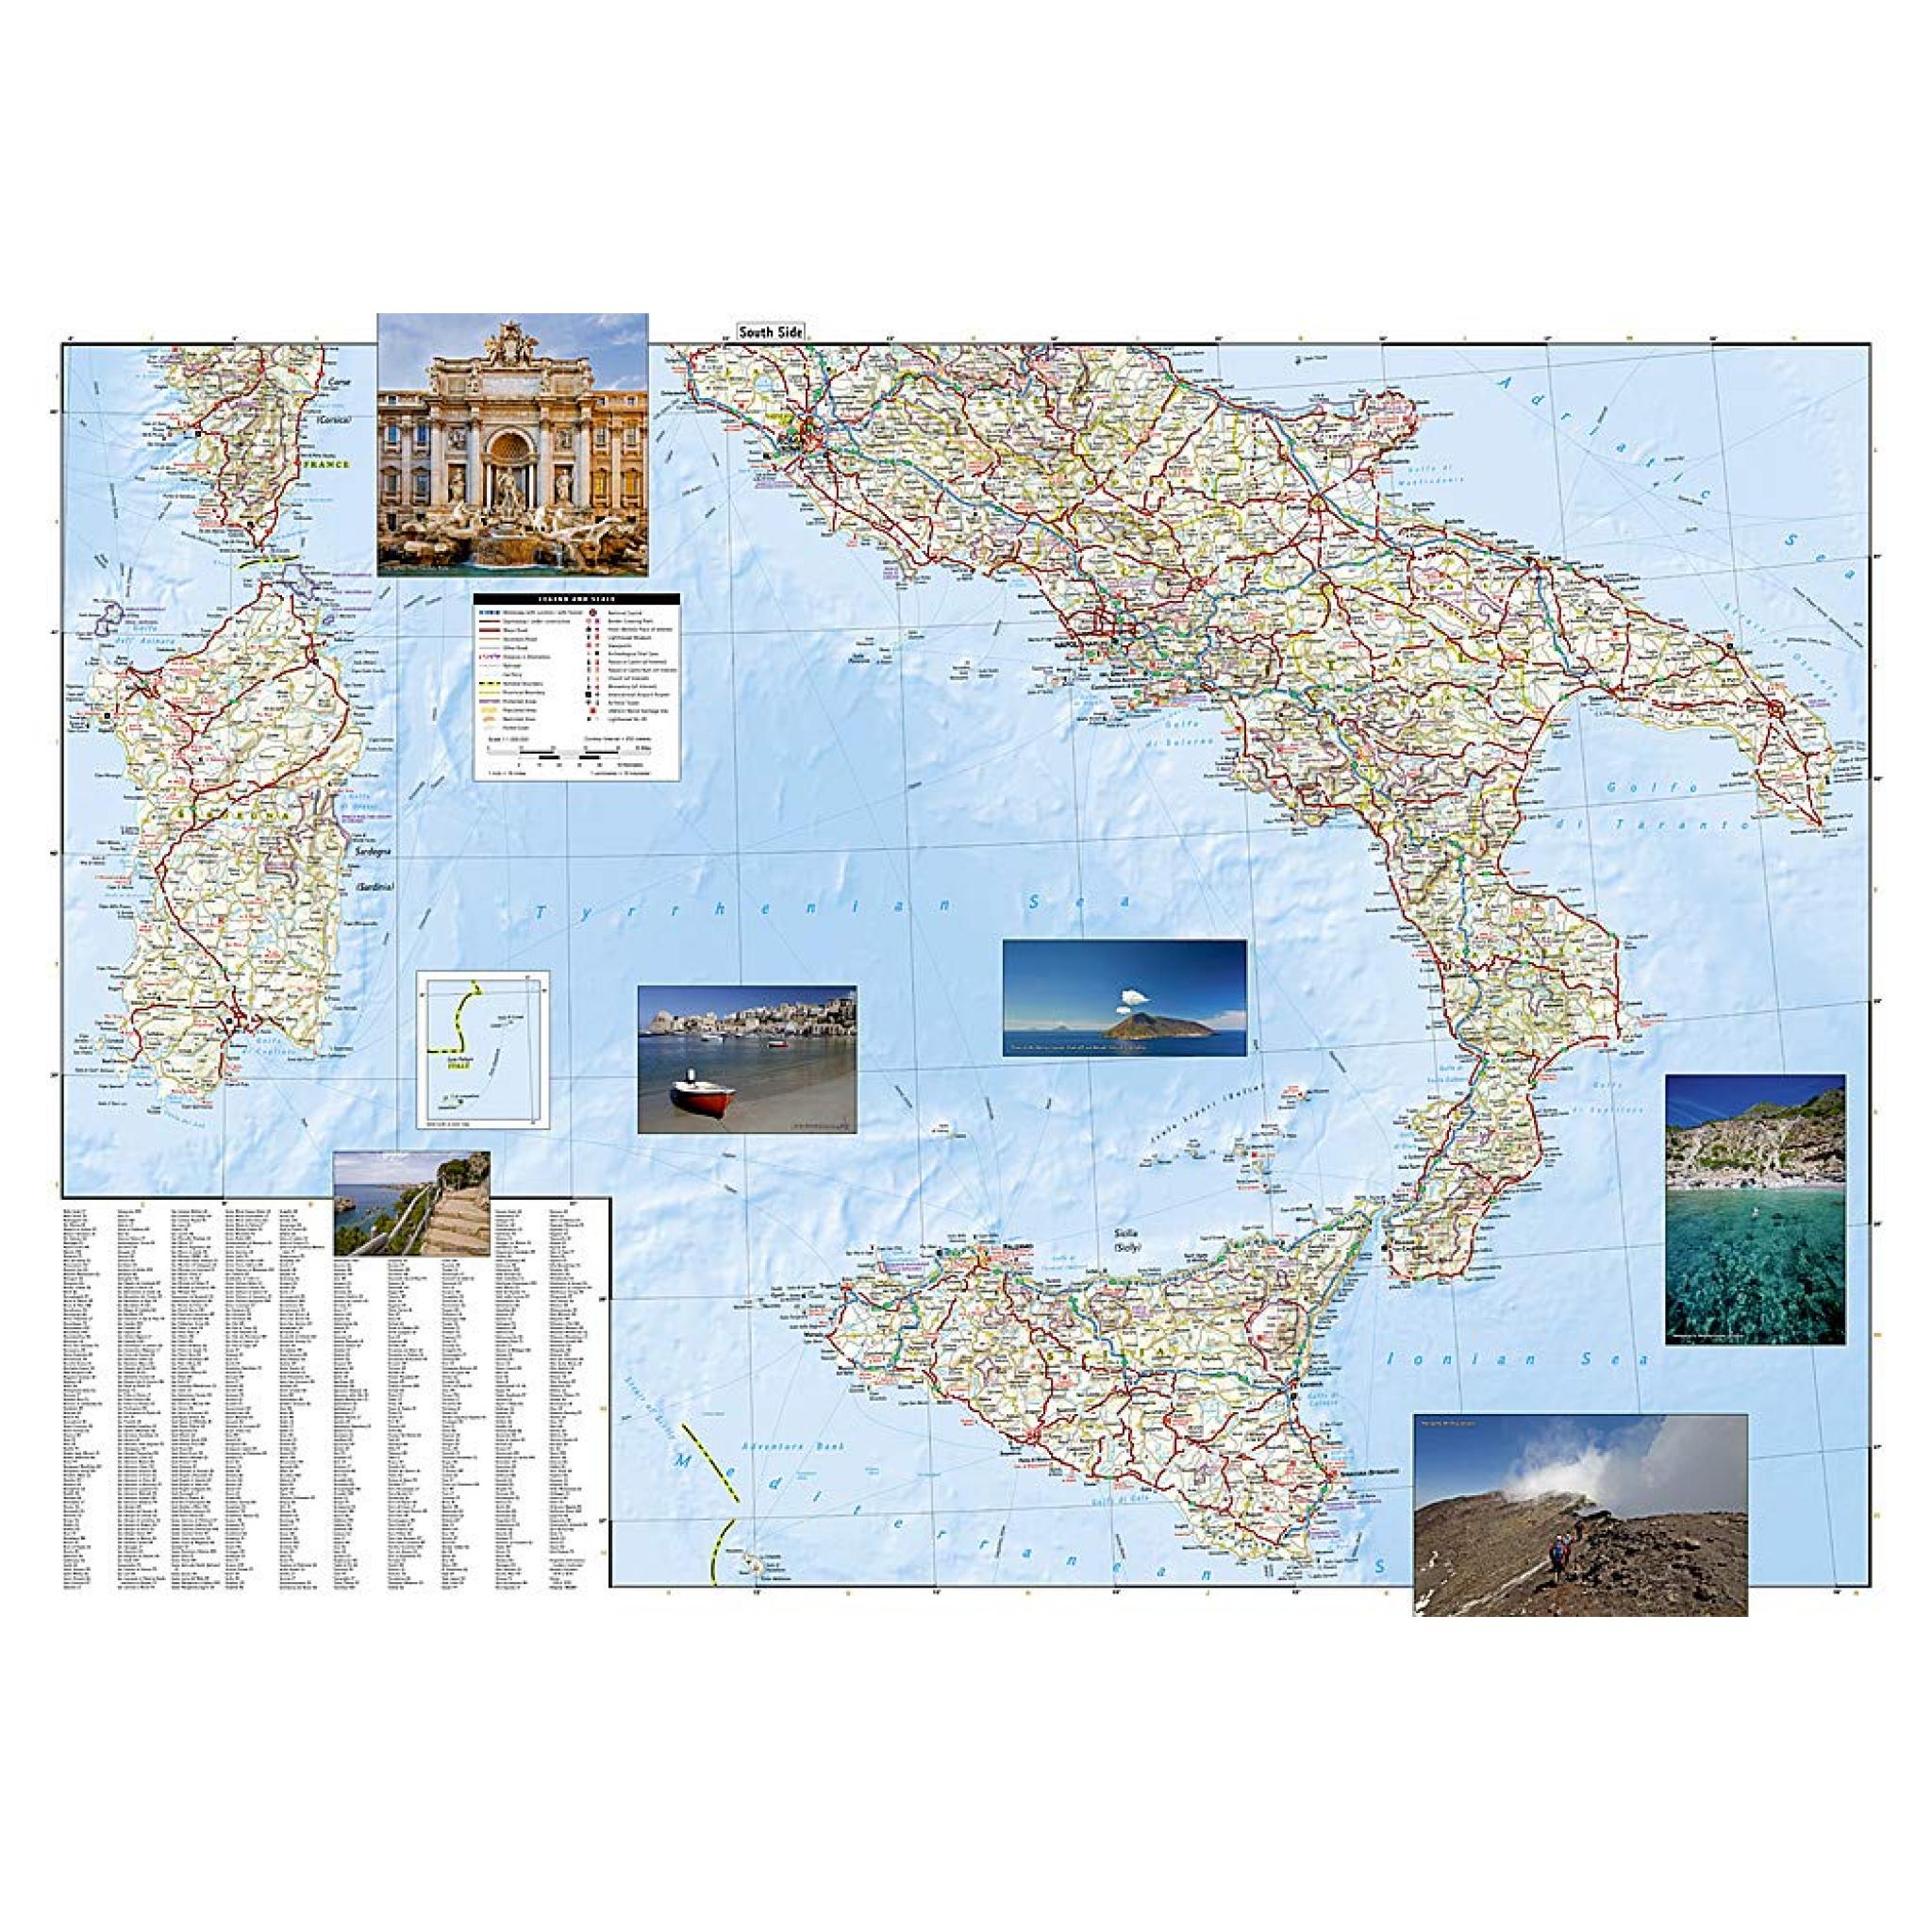 national geographic italy travel guide